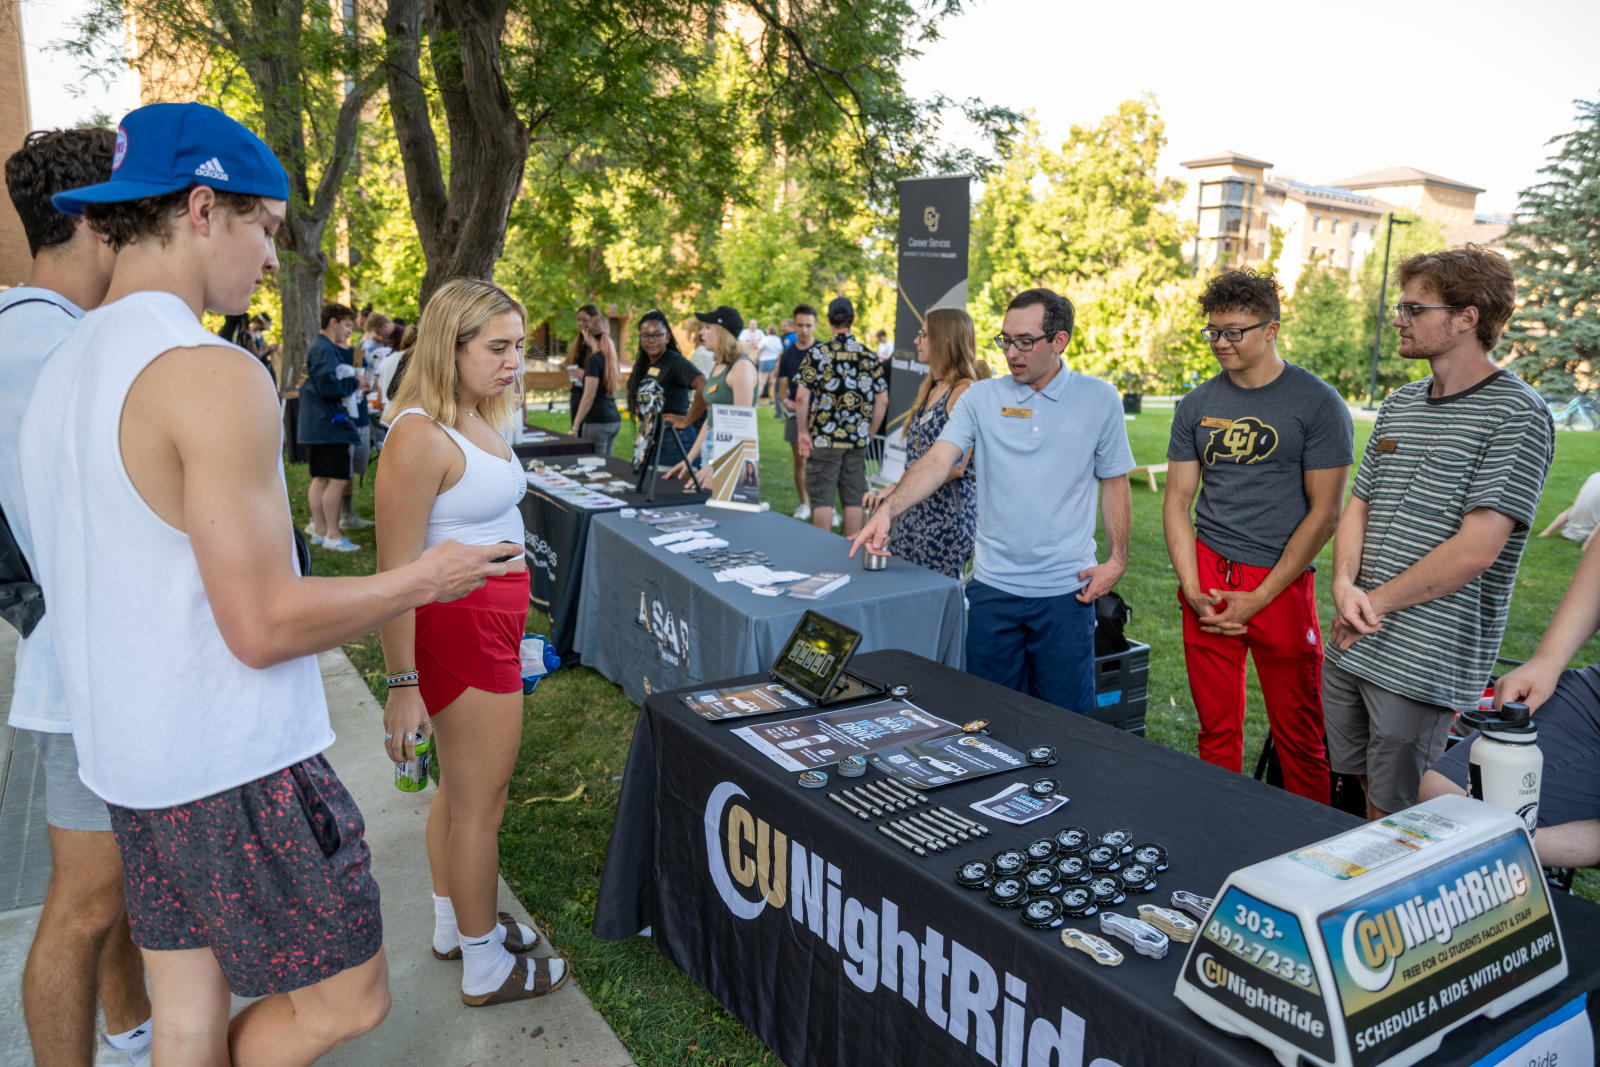 Students tabling for CU NightRide